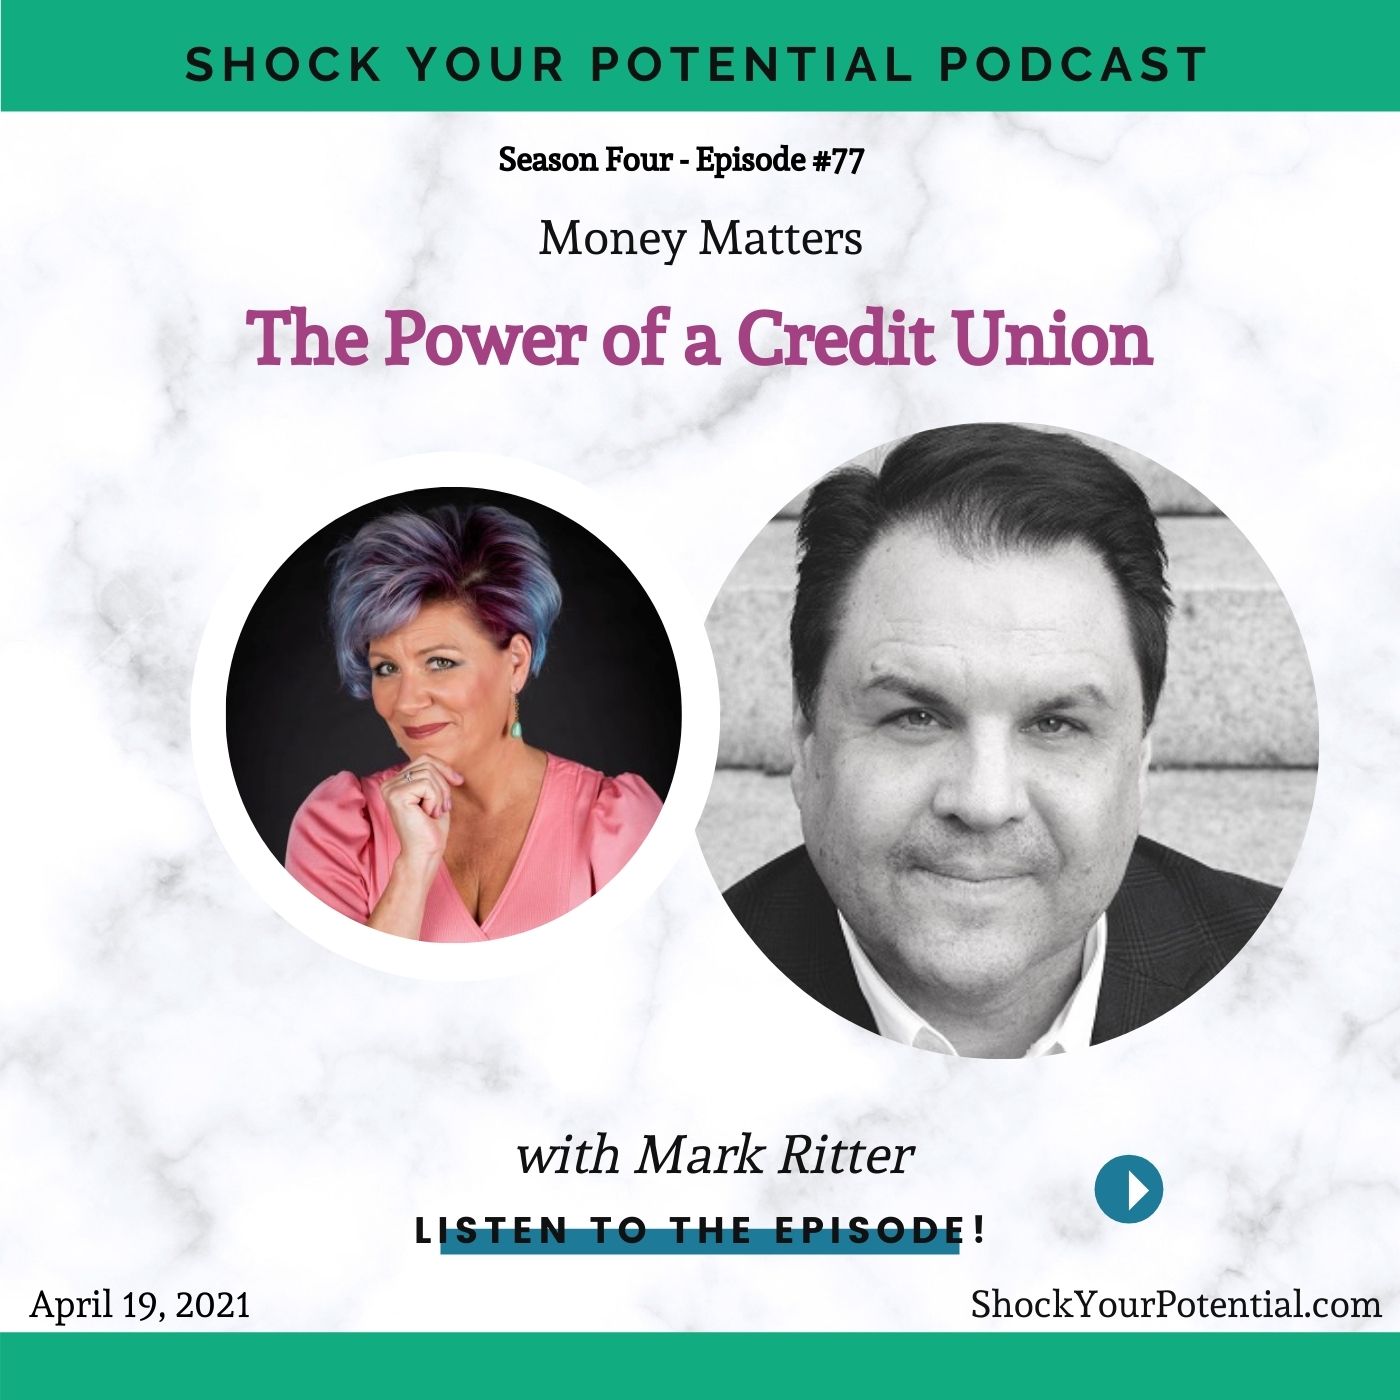 The Power of a Credit Union – Mark Ritter